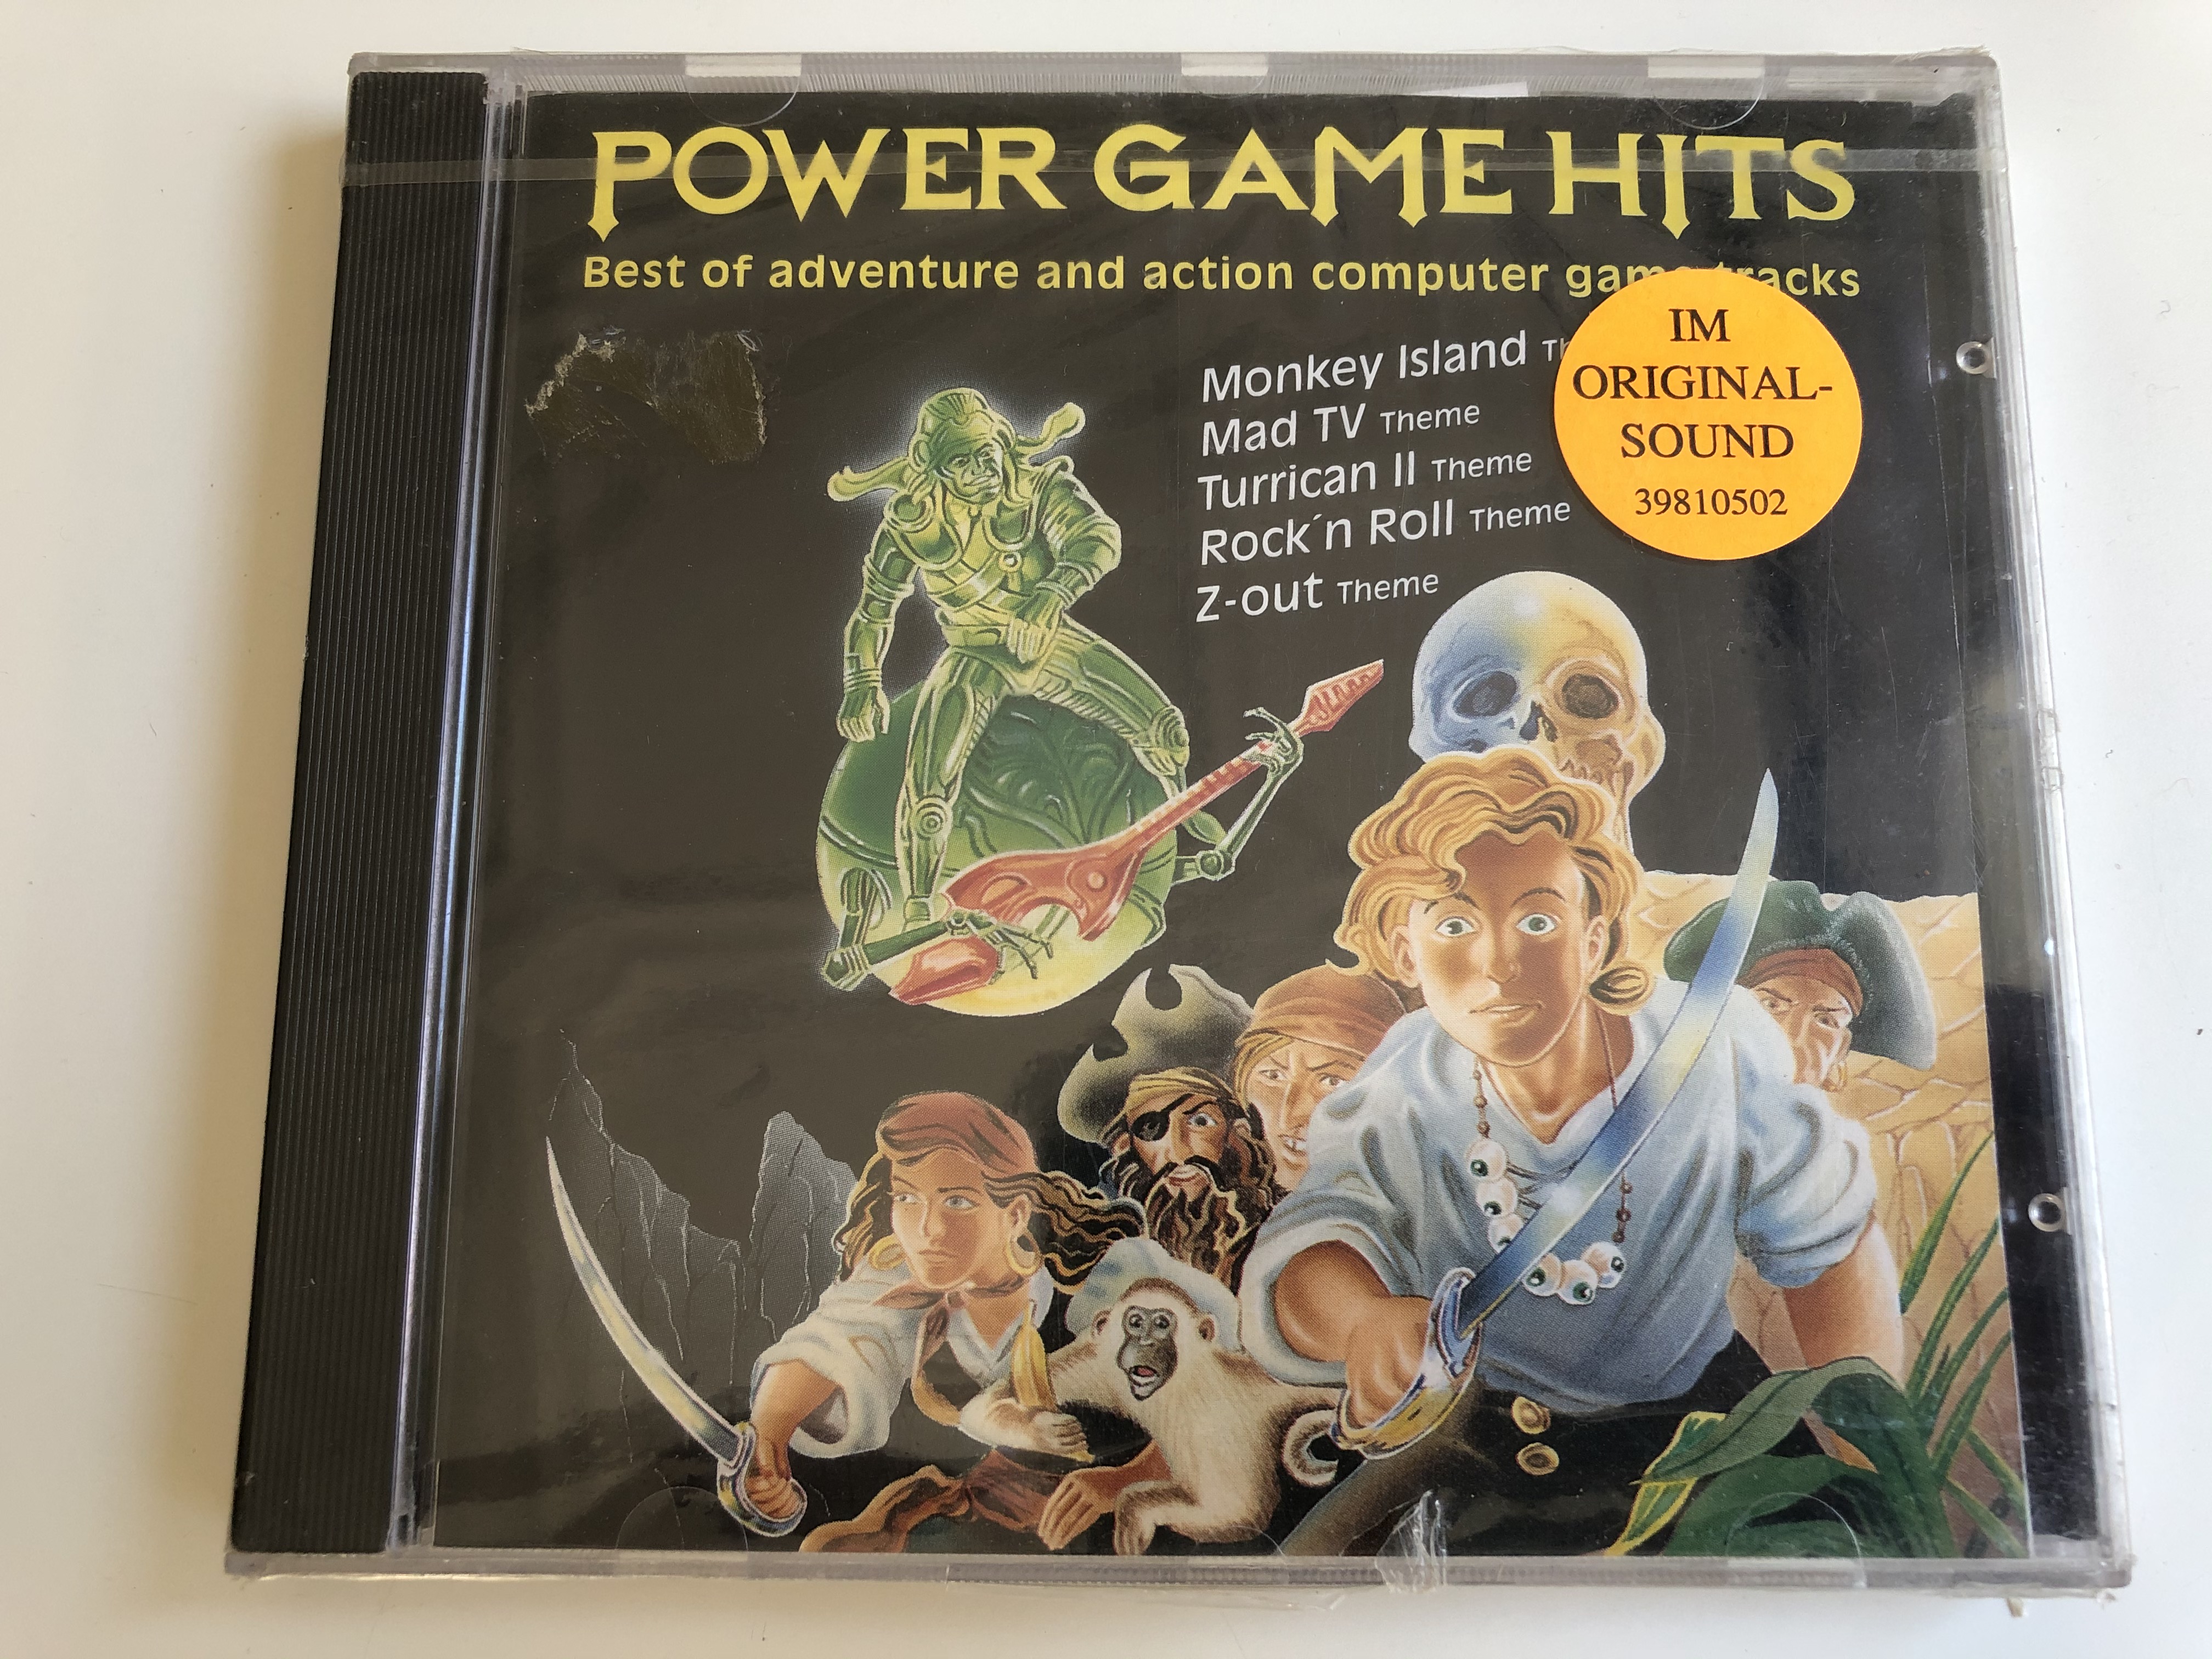 power-game-hits-best-of-adventure-and-action-computer-game-tracks-monkey-island-theme-mad-tv-theme-turrican-ii-theme-rock-n-roll-theme-z-out-theme-eurostar-audio-cd-1992-39810502-1-.jpg